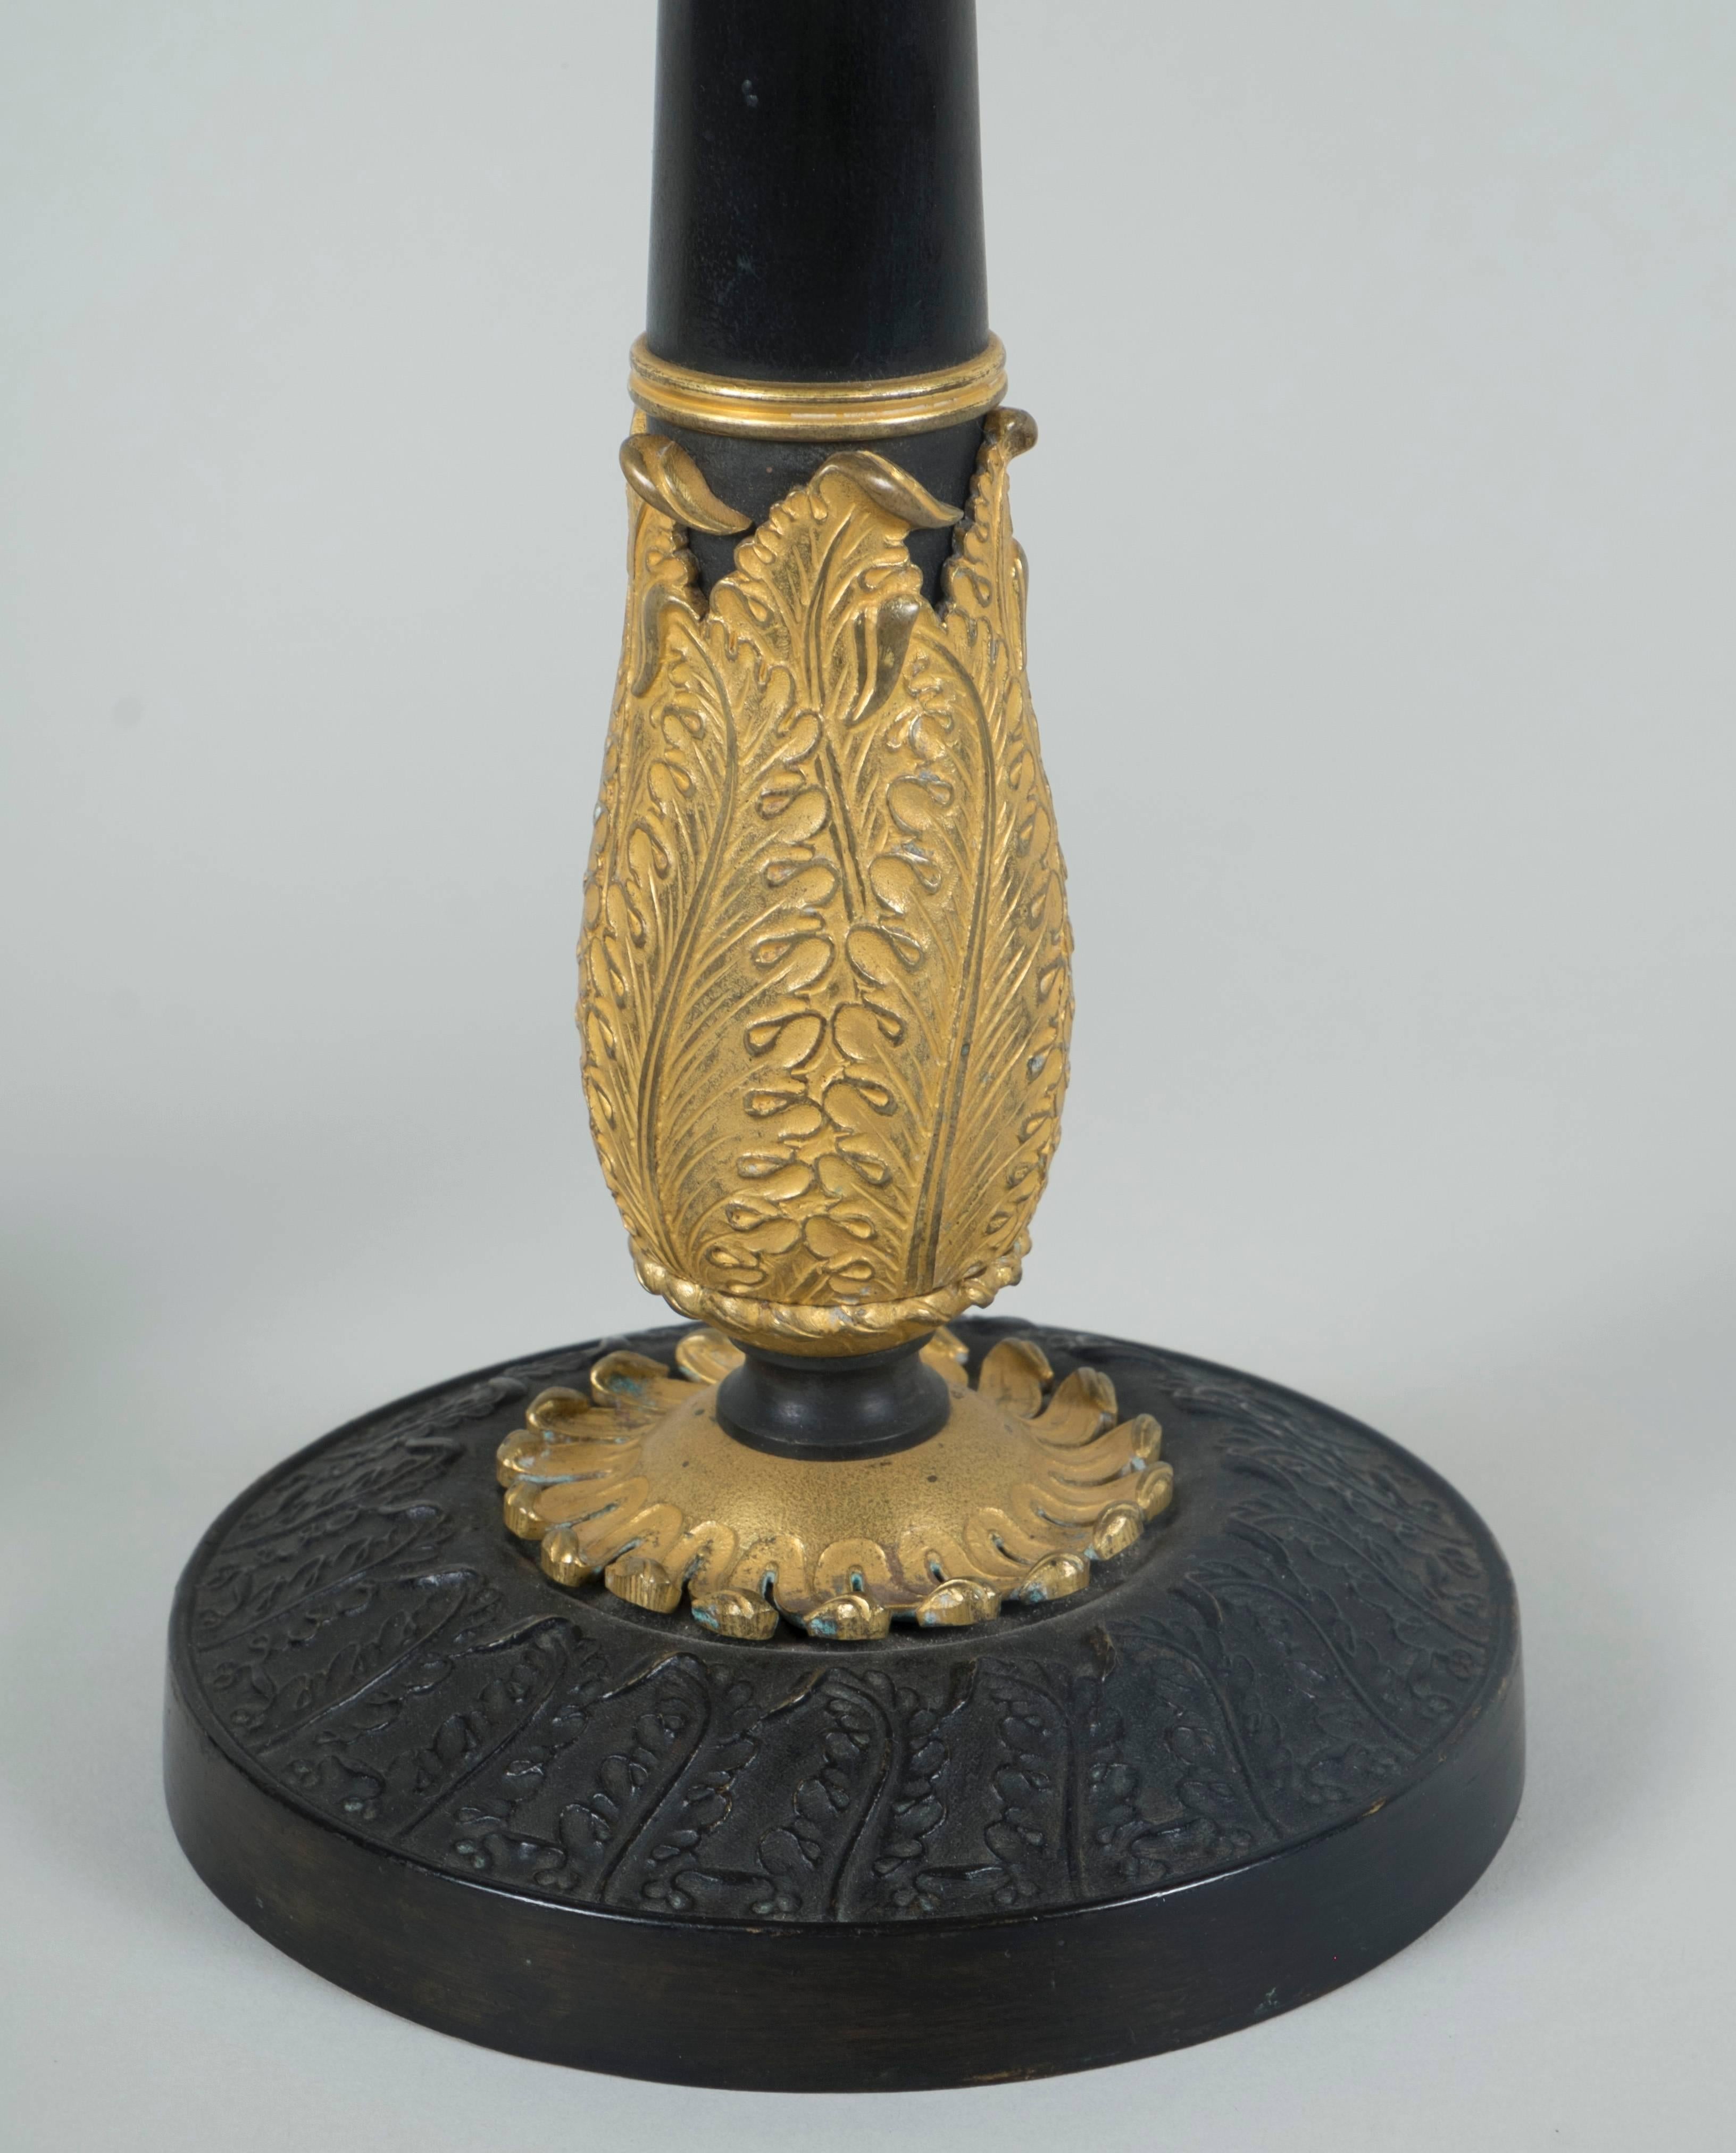 Pair of gilt and patinated bronze candlesticks.

Work from the 19th century, circa 1815.

Dimensions:
30 cm H x 12.5 cm D.